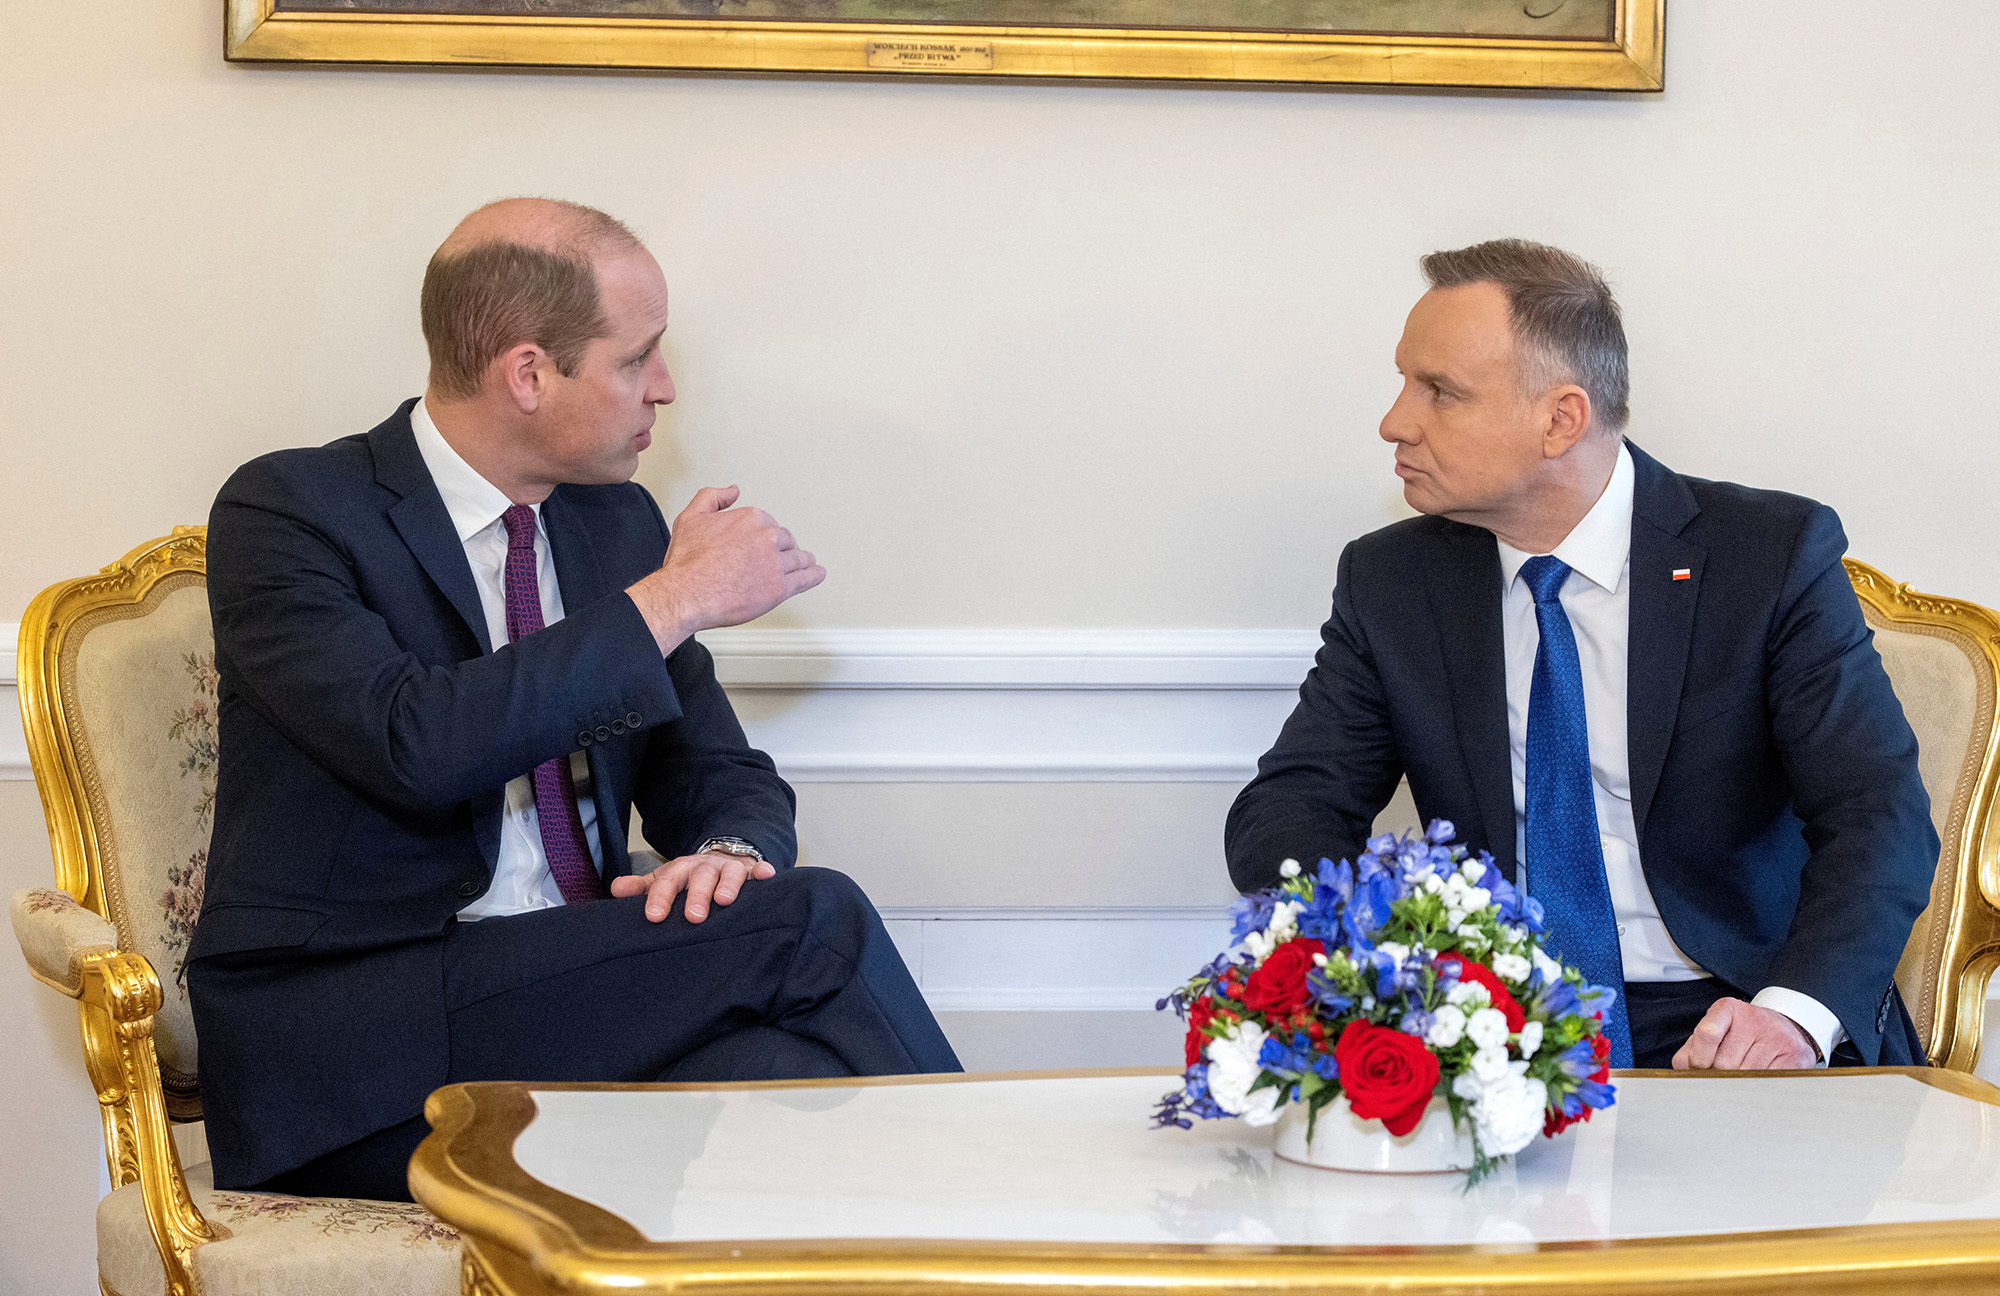 William, Prince of Wales, left, meets with Poland's President Andrzej Duda in Warsaw, Poland, on March 23.